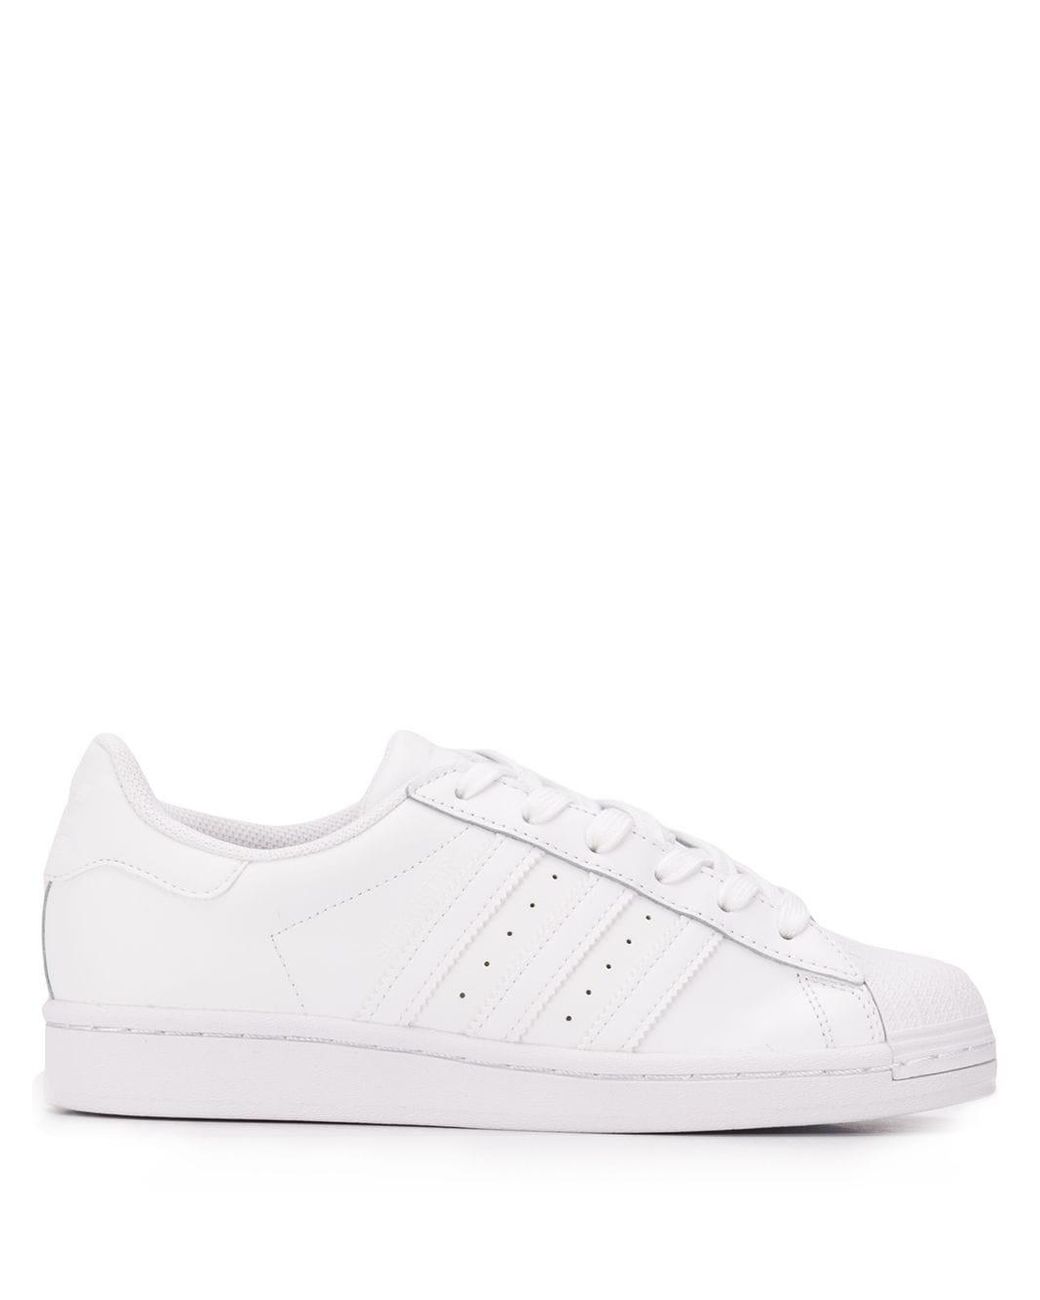 adidas Leather Superstar Sneakers in White - Lyst